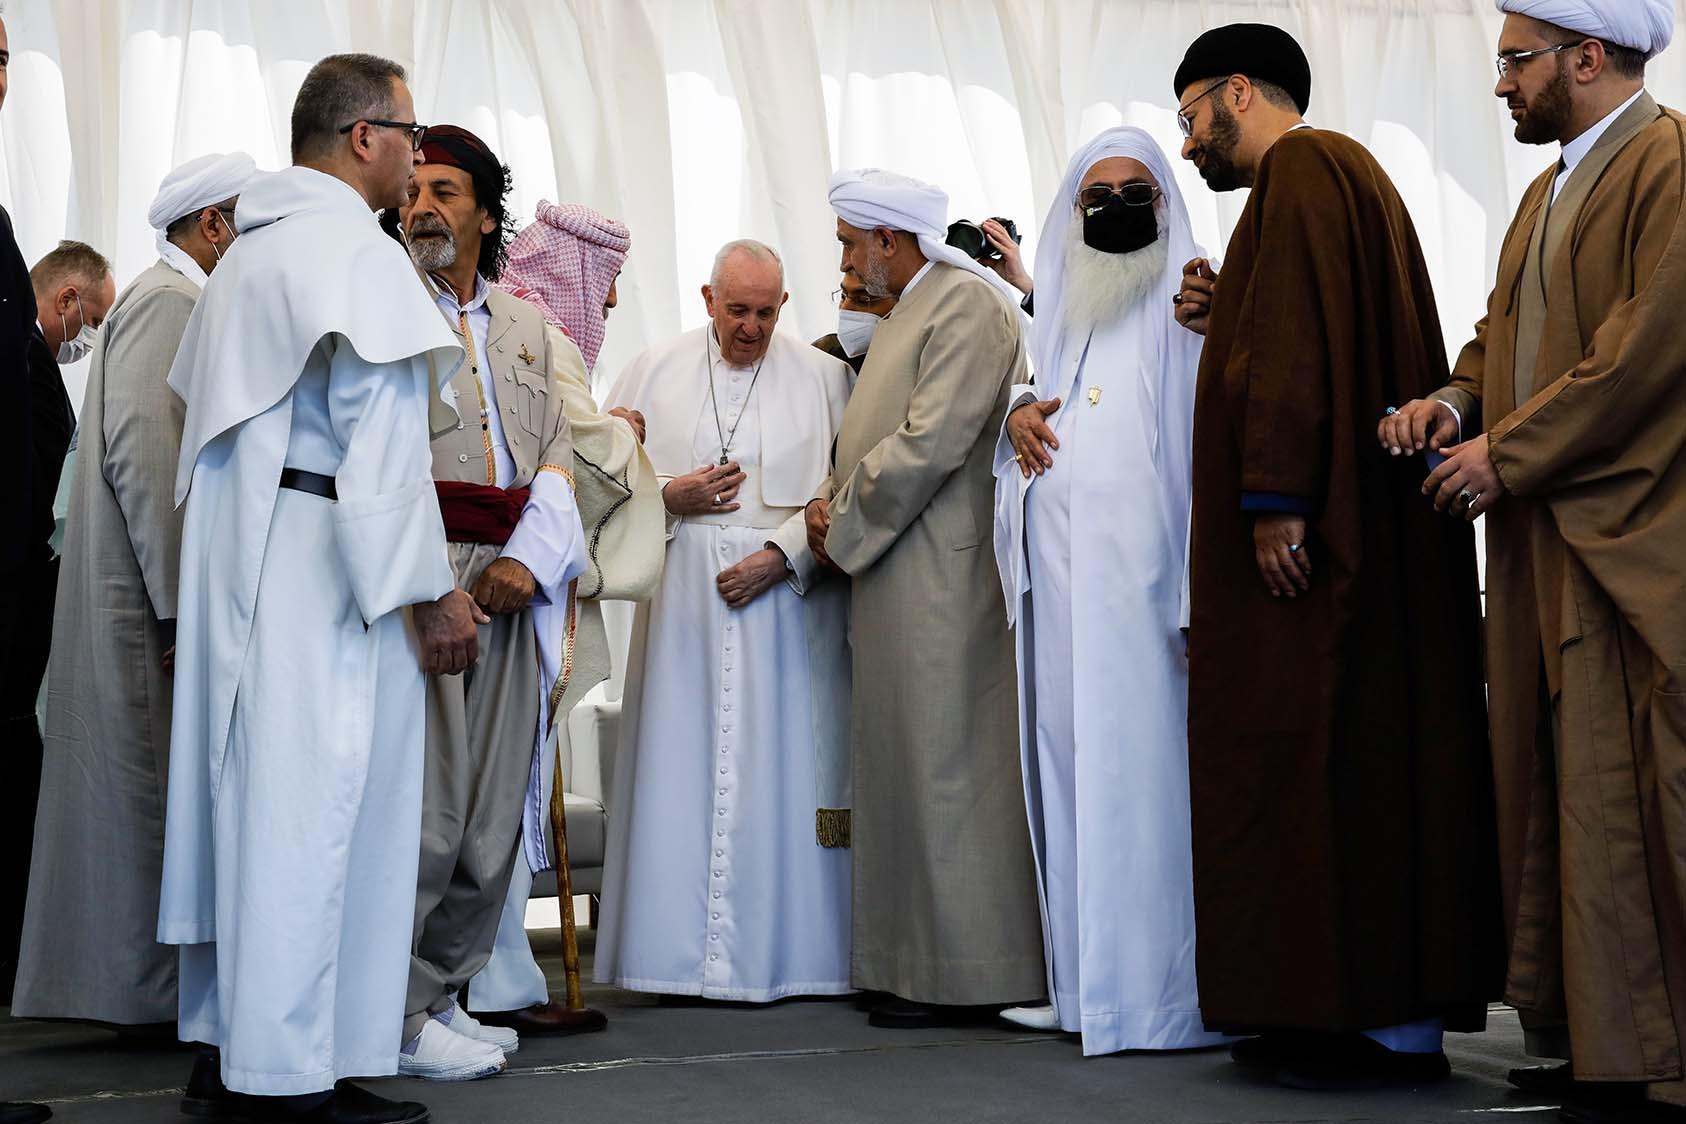 Pope Francis, center, meets leaders of varied faiths during his visit to Iraq in March. He presses religious communities to urgently repair COVID’s harms to human welfare and warns of the “risk of misinformation” online. (Ivor Prickett/The New York Times)